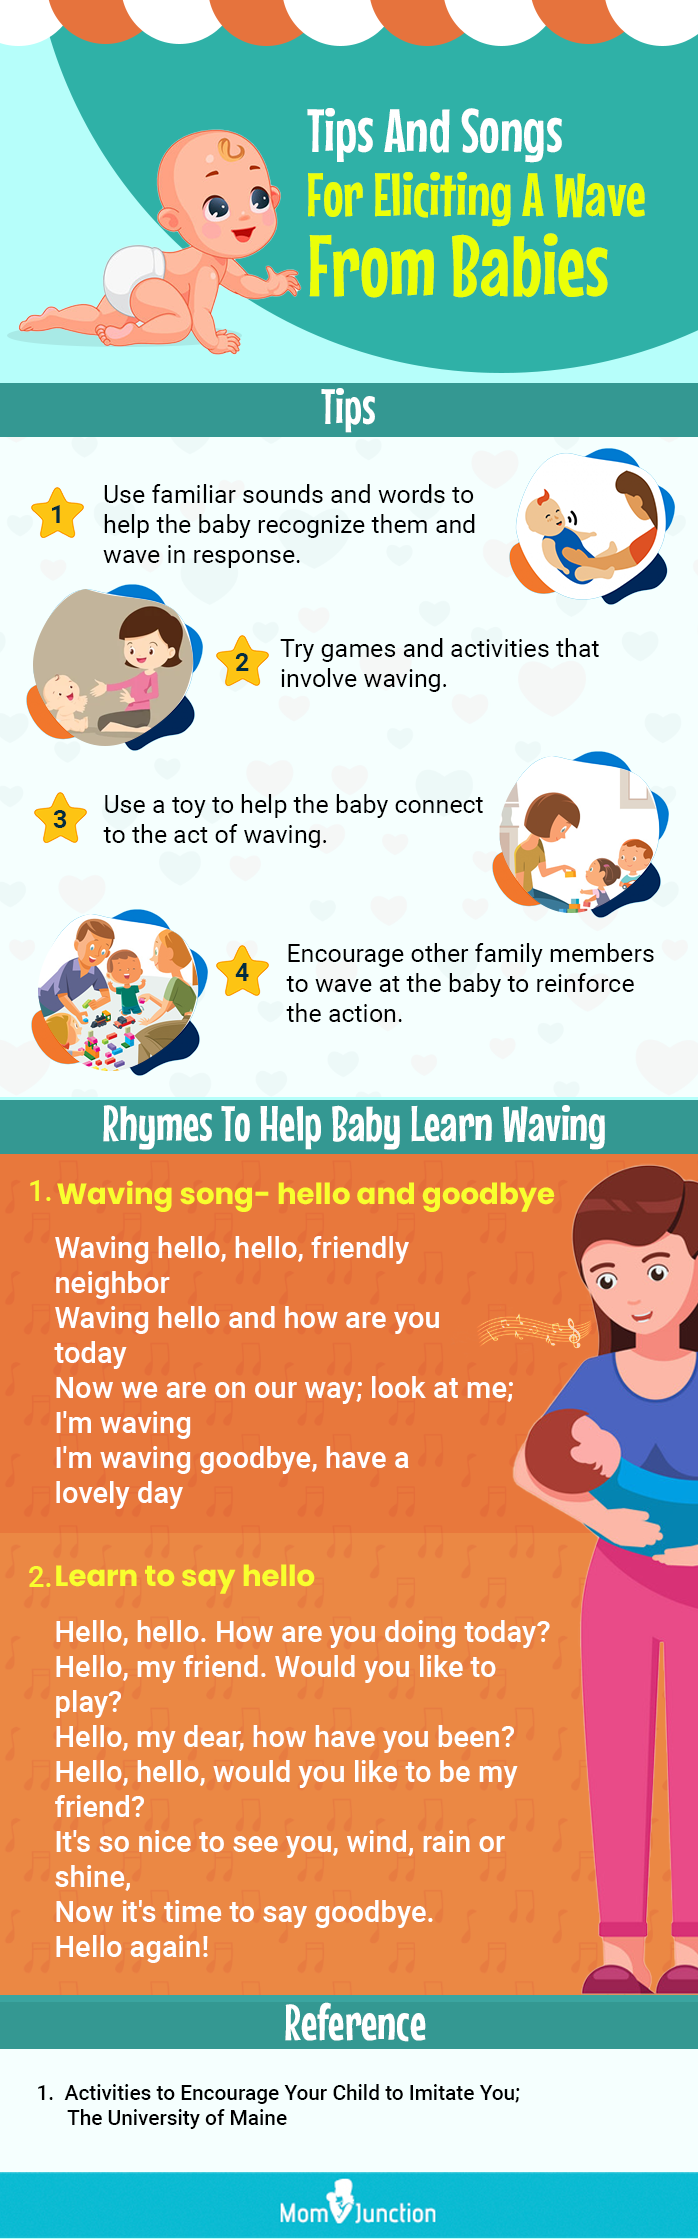 songs for babies (infographic)